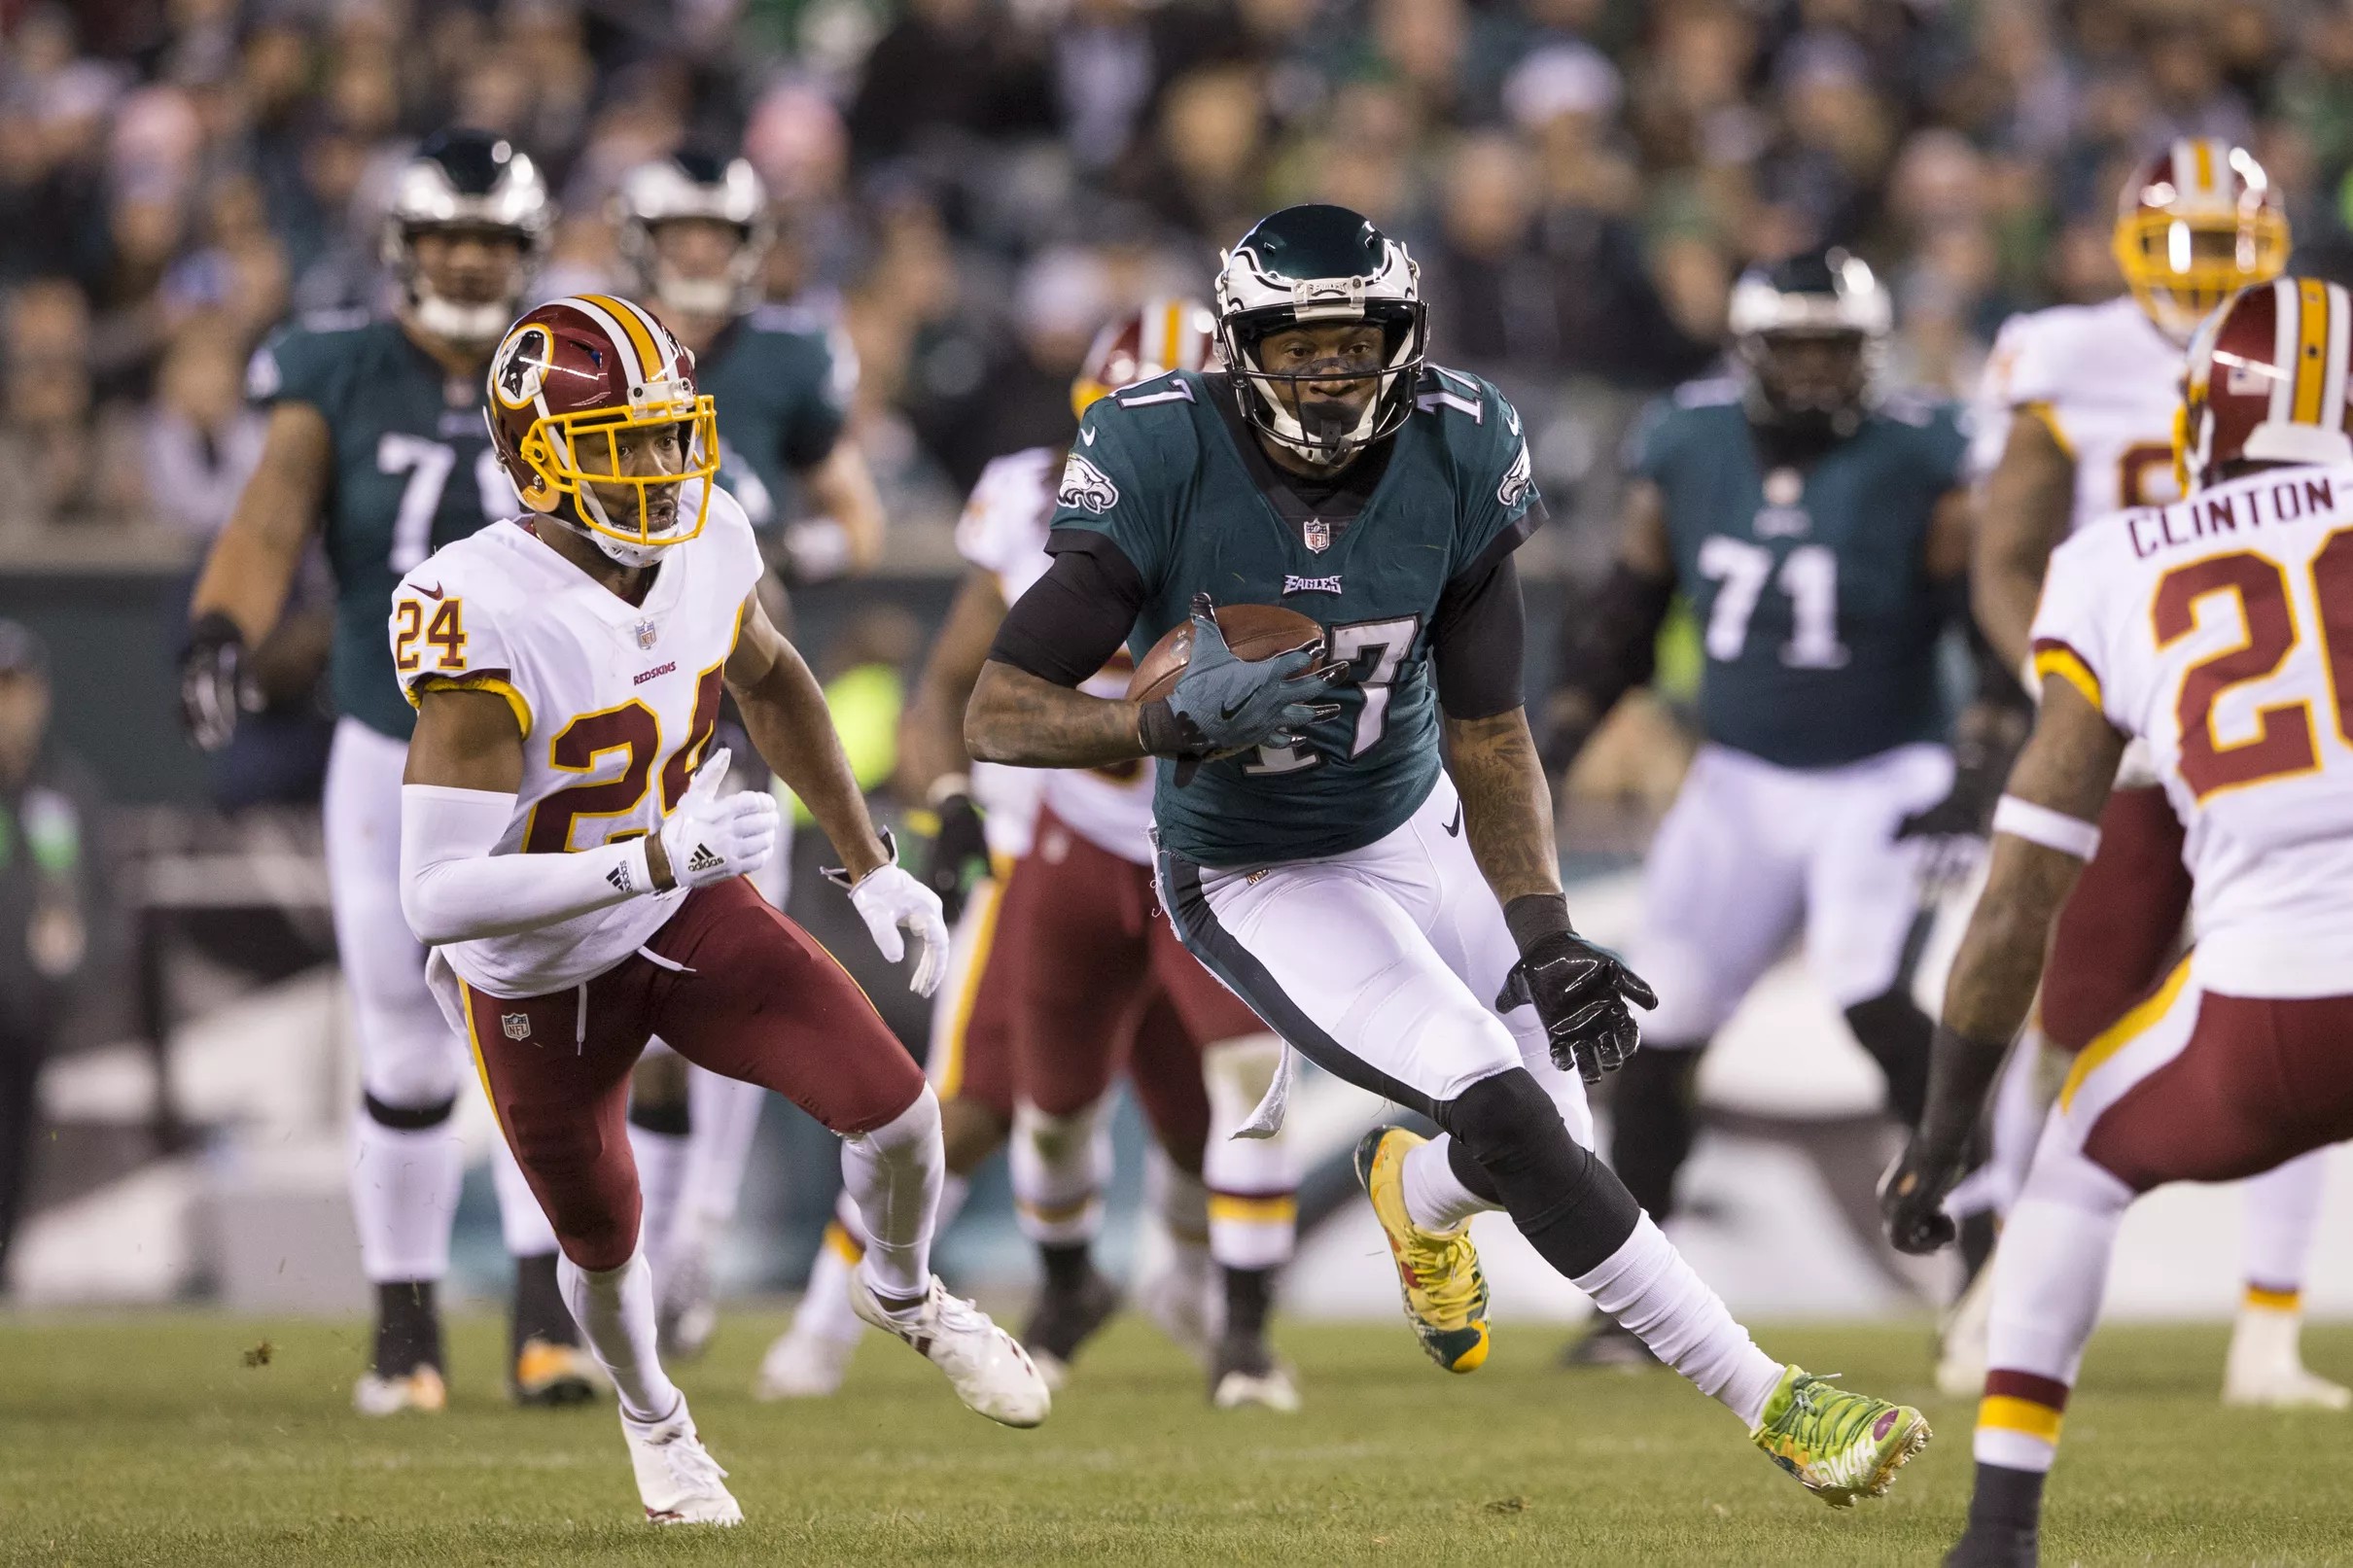 Eagles Injury Report: Alshon Jeffery among three players limited in